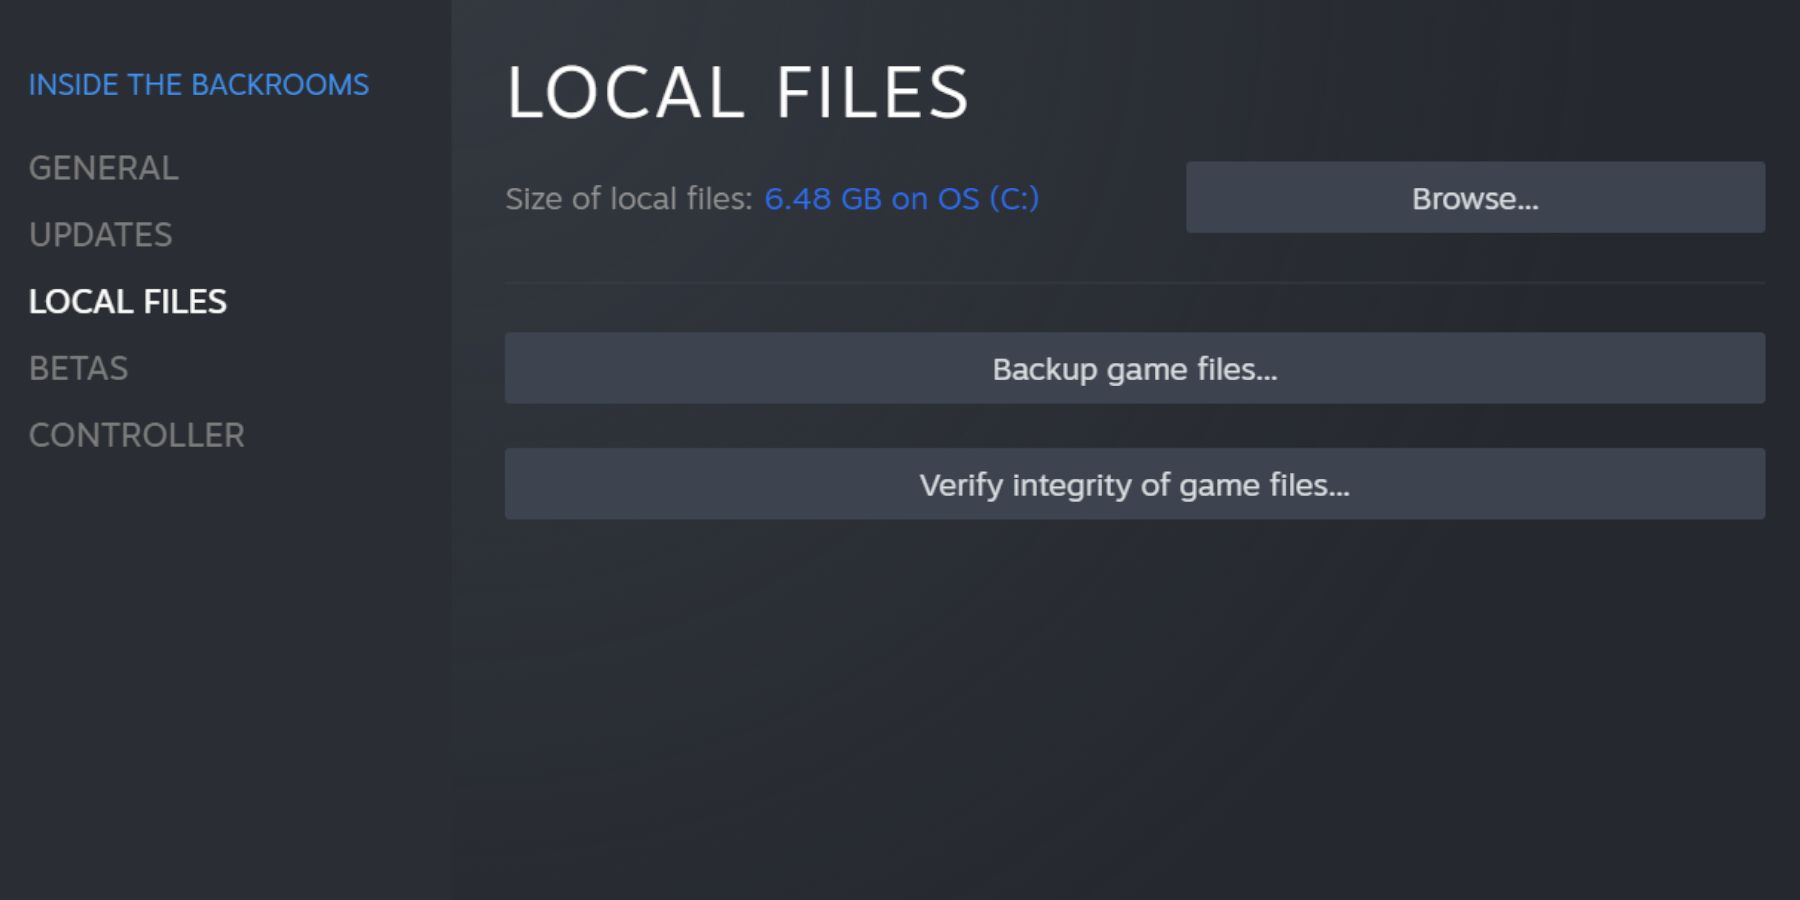 Inside the Backrooms accessing Local Files on the Steam app